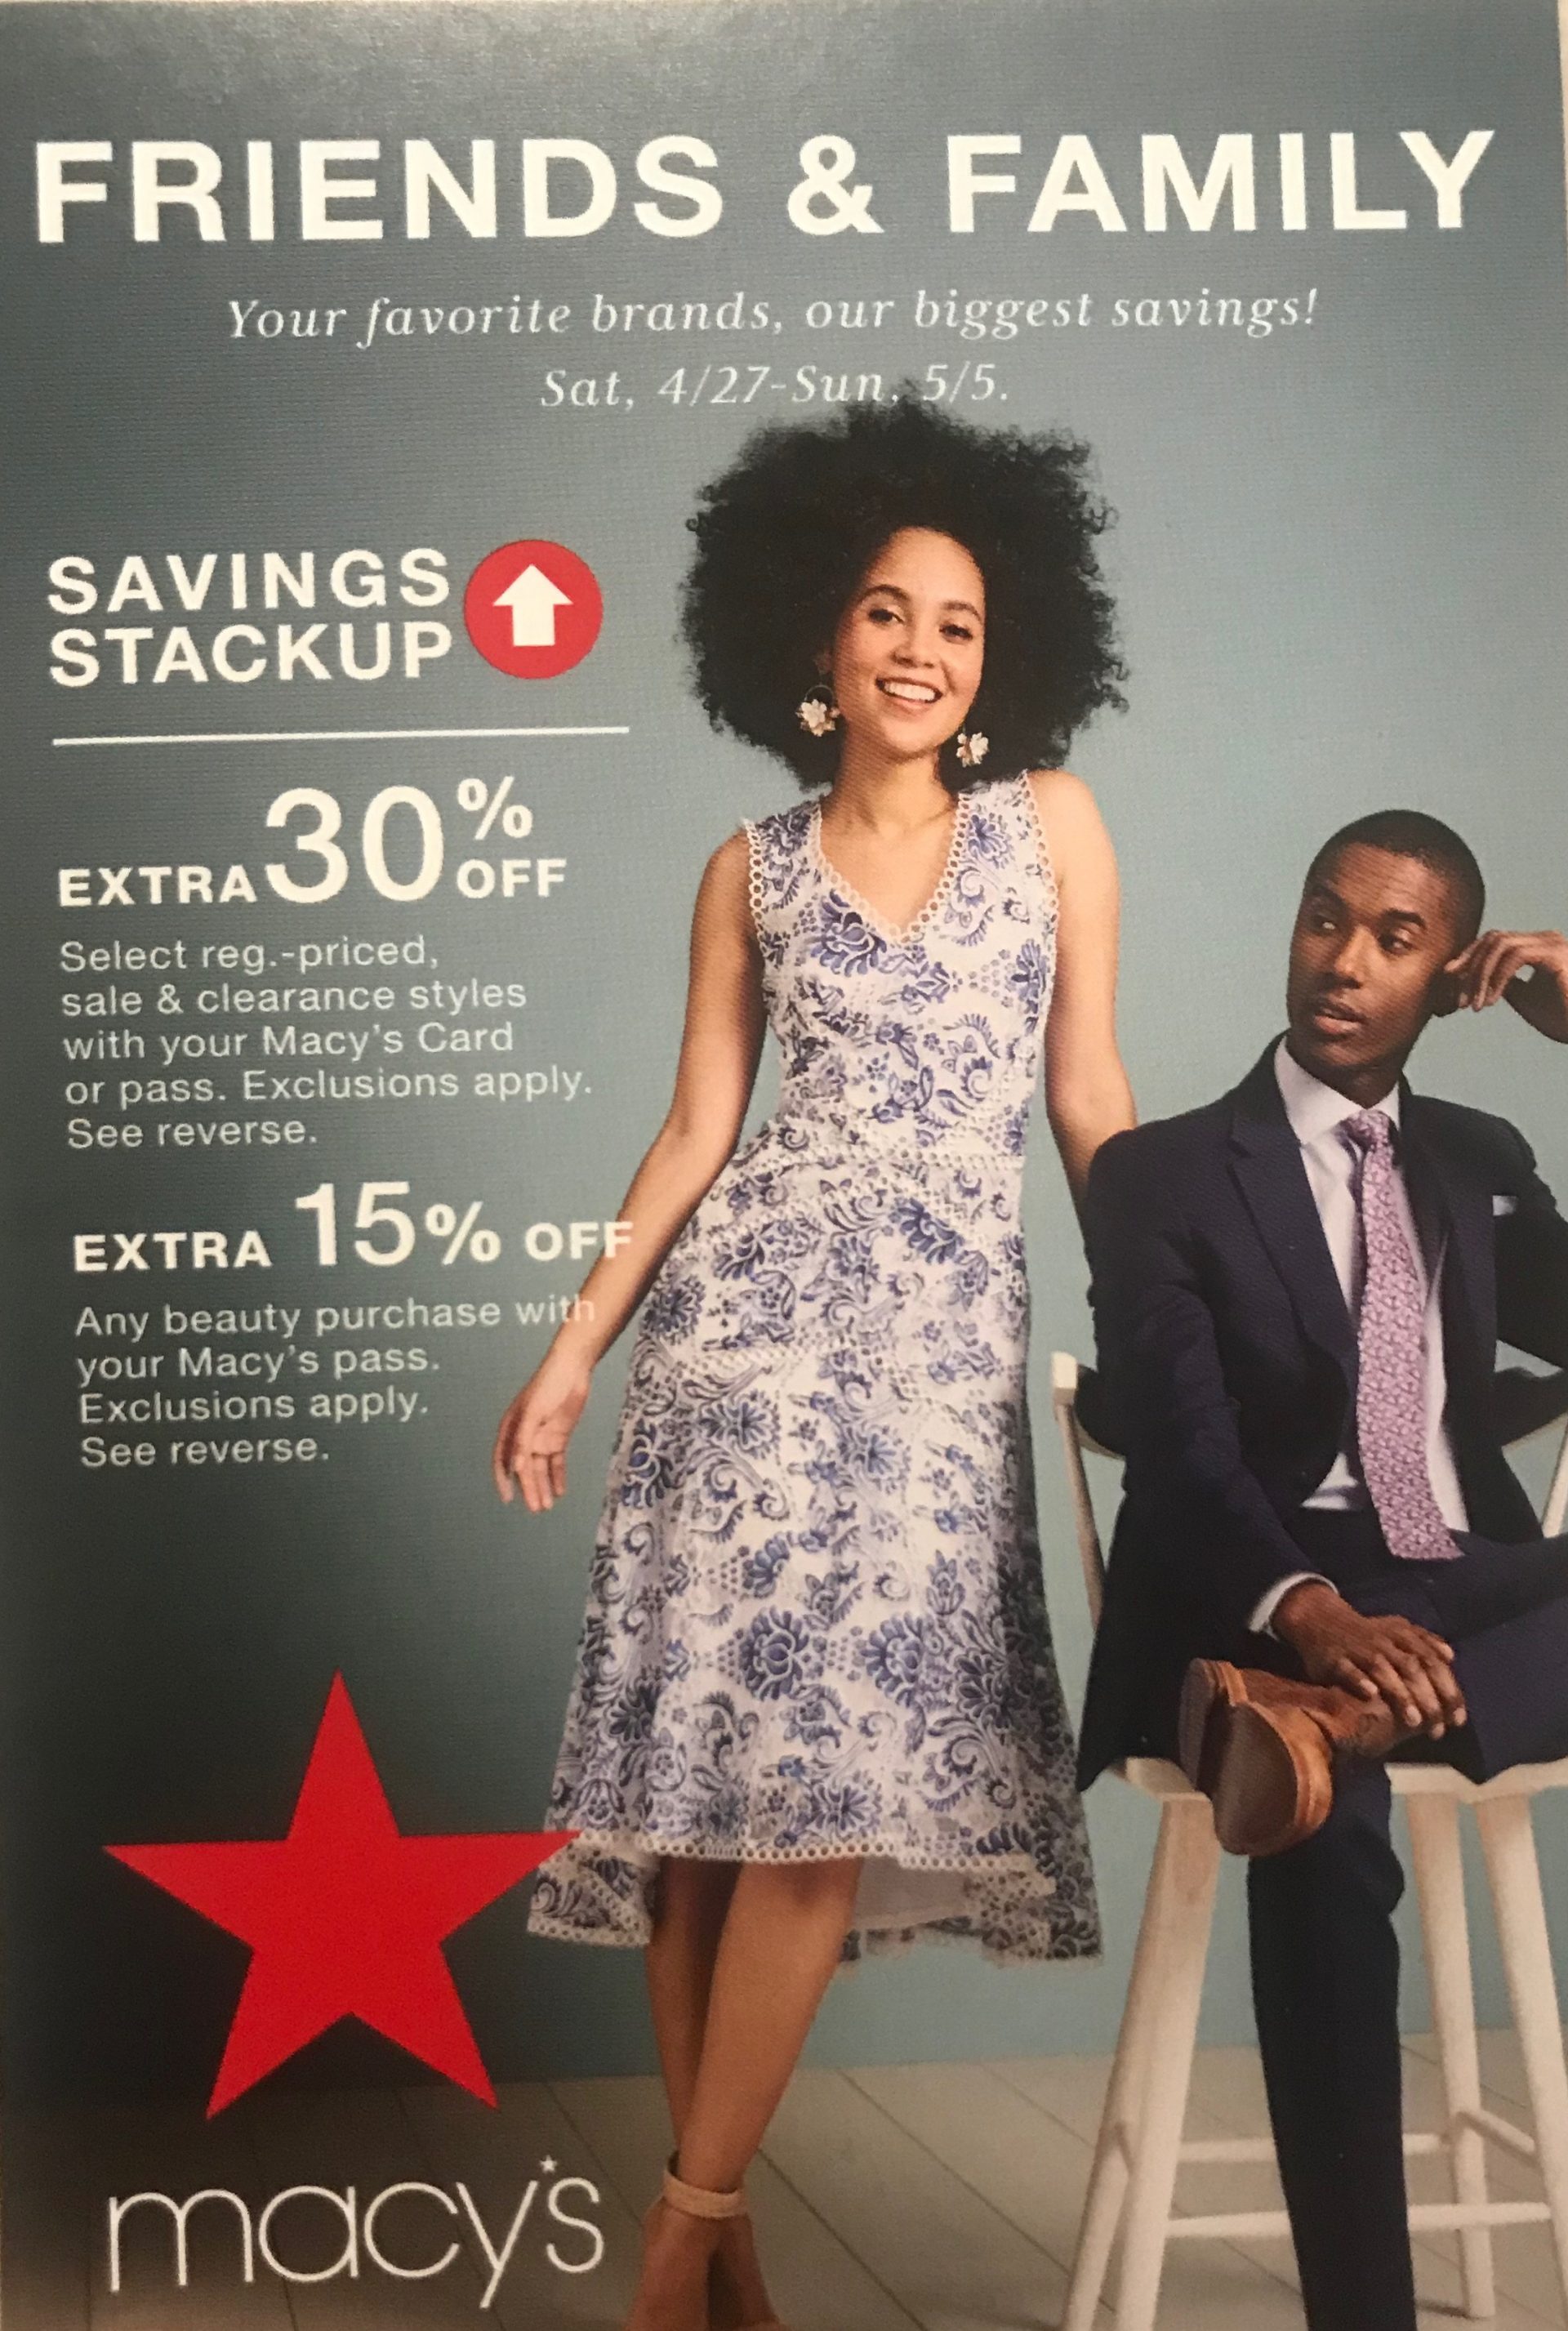 Macy's Friends and Family Sale Walden Galleria